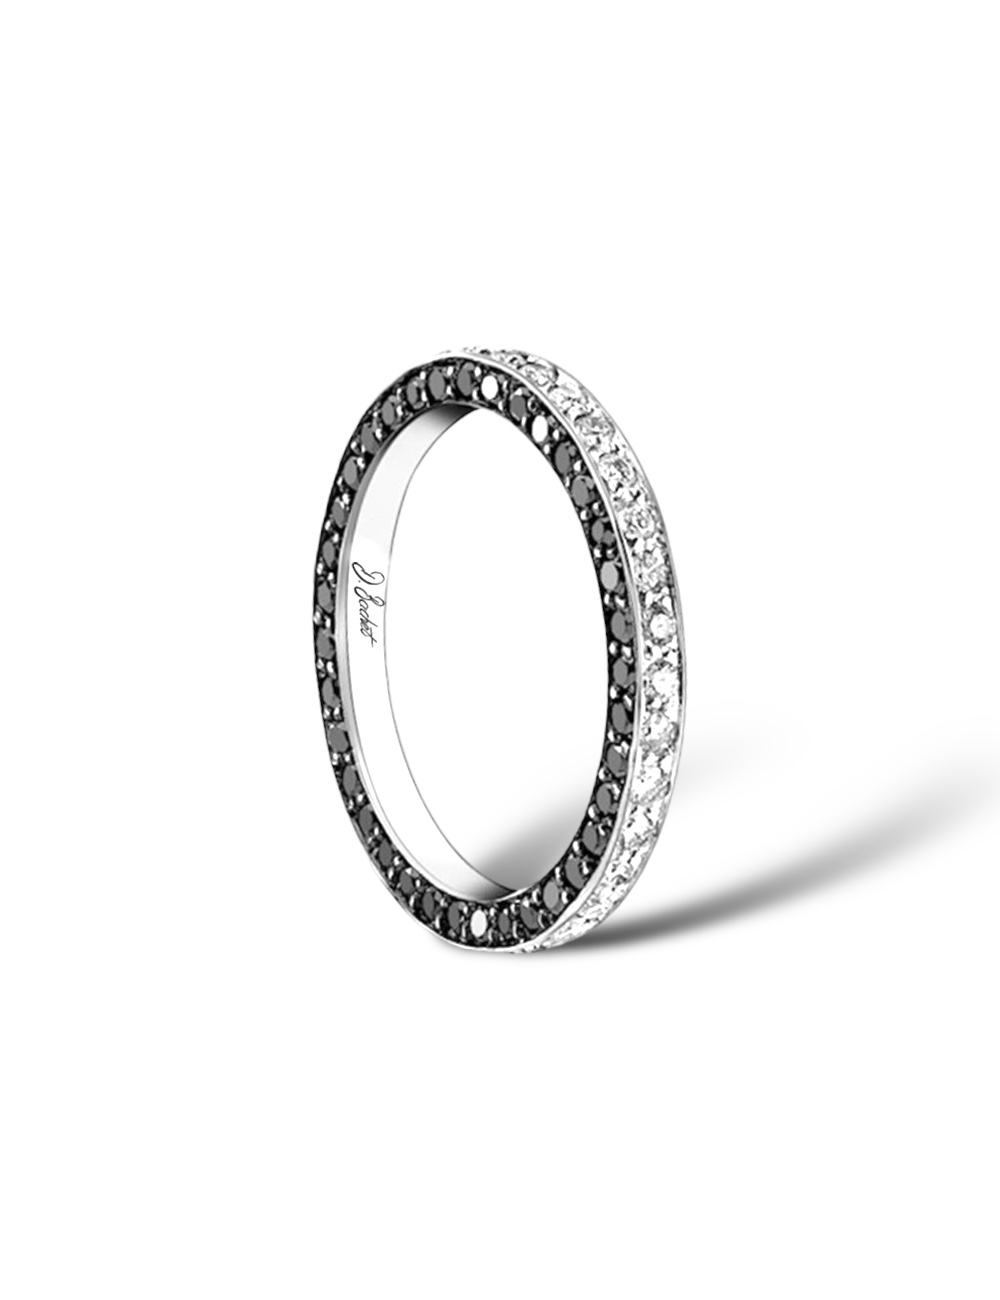 Diamond ring for women with white and black diamonds, perfect alone or with an engagement ring.